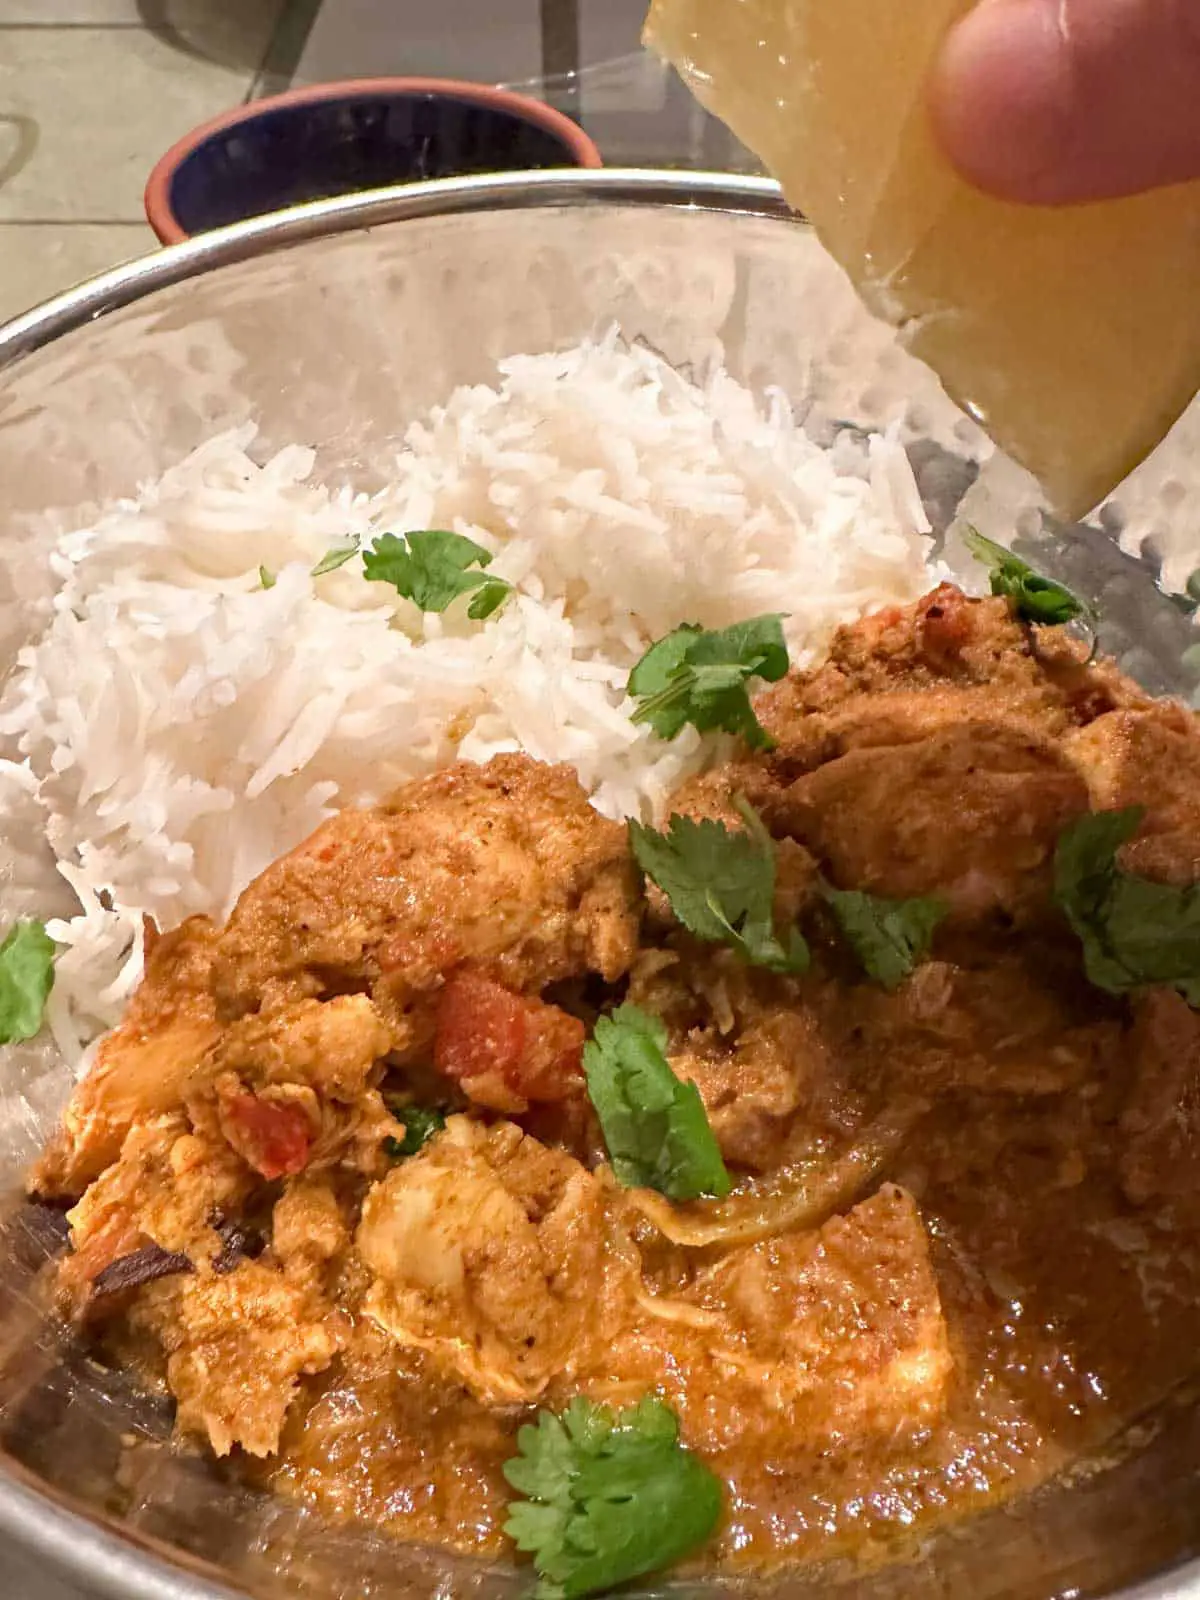 Spicy Indian Chicken Curry with basmati rice garnished with cilantro in a silver balti dish with a wedge of lemon poised over the chicken. There is a small blue bowl behind the balti dish.